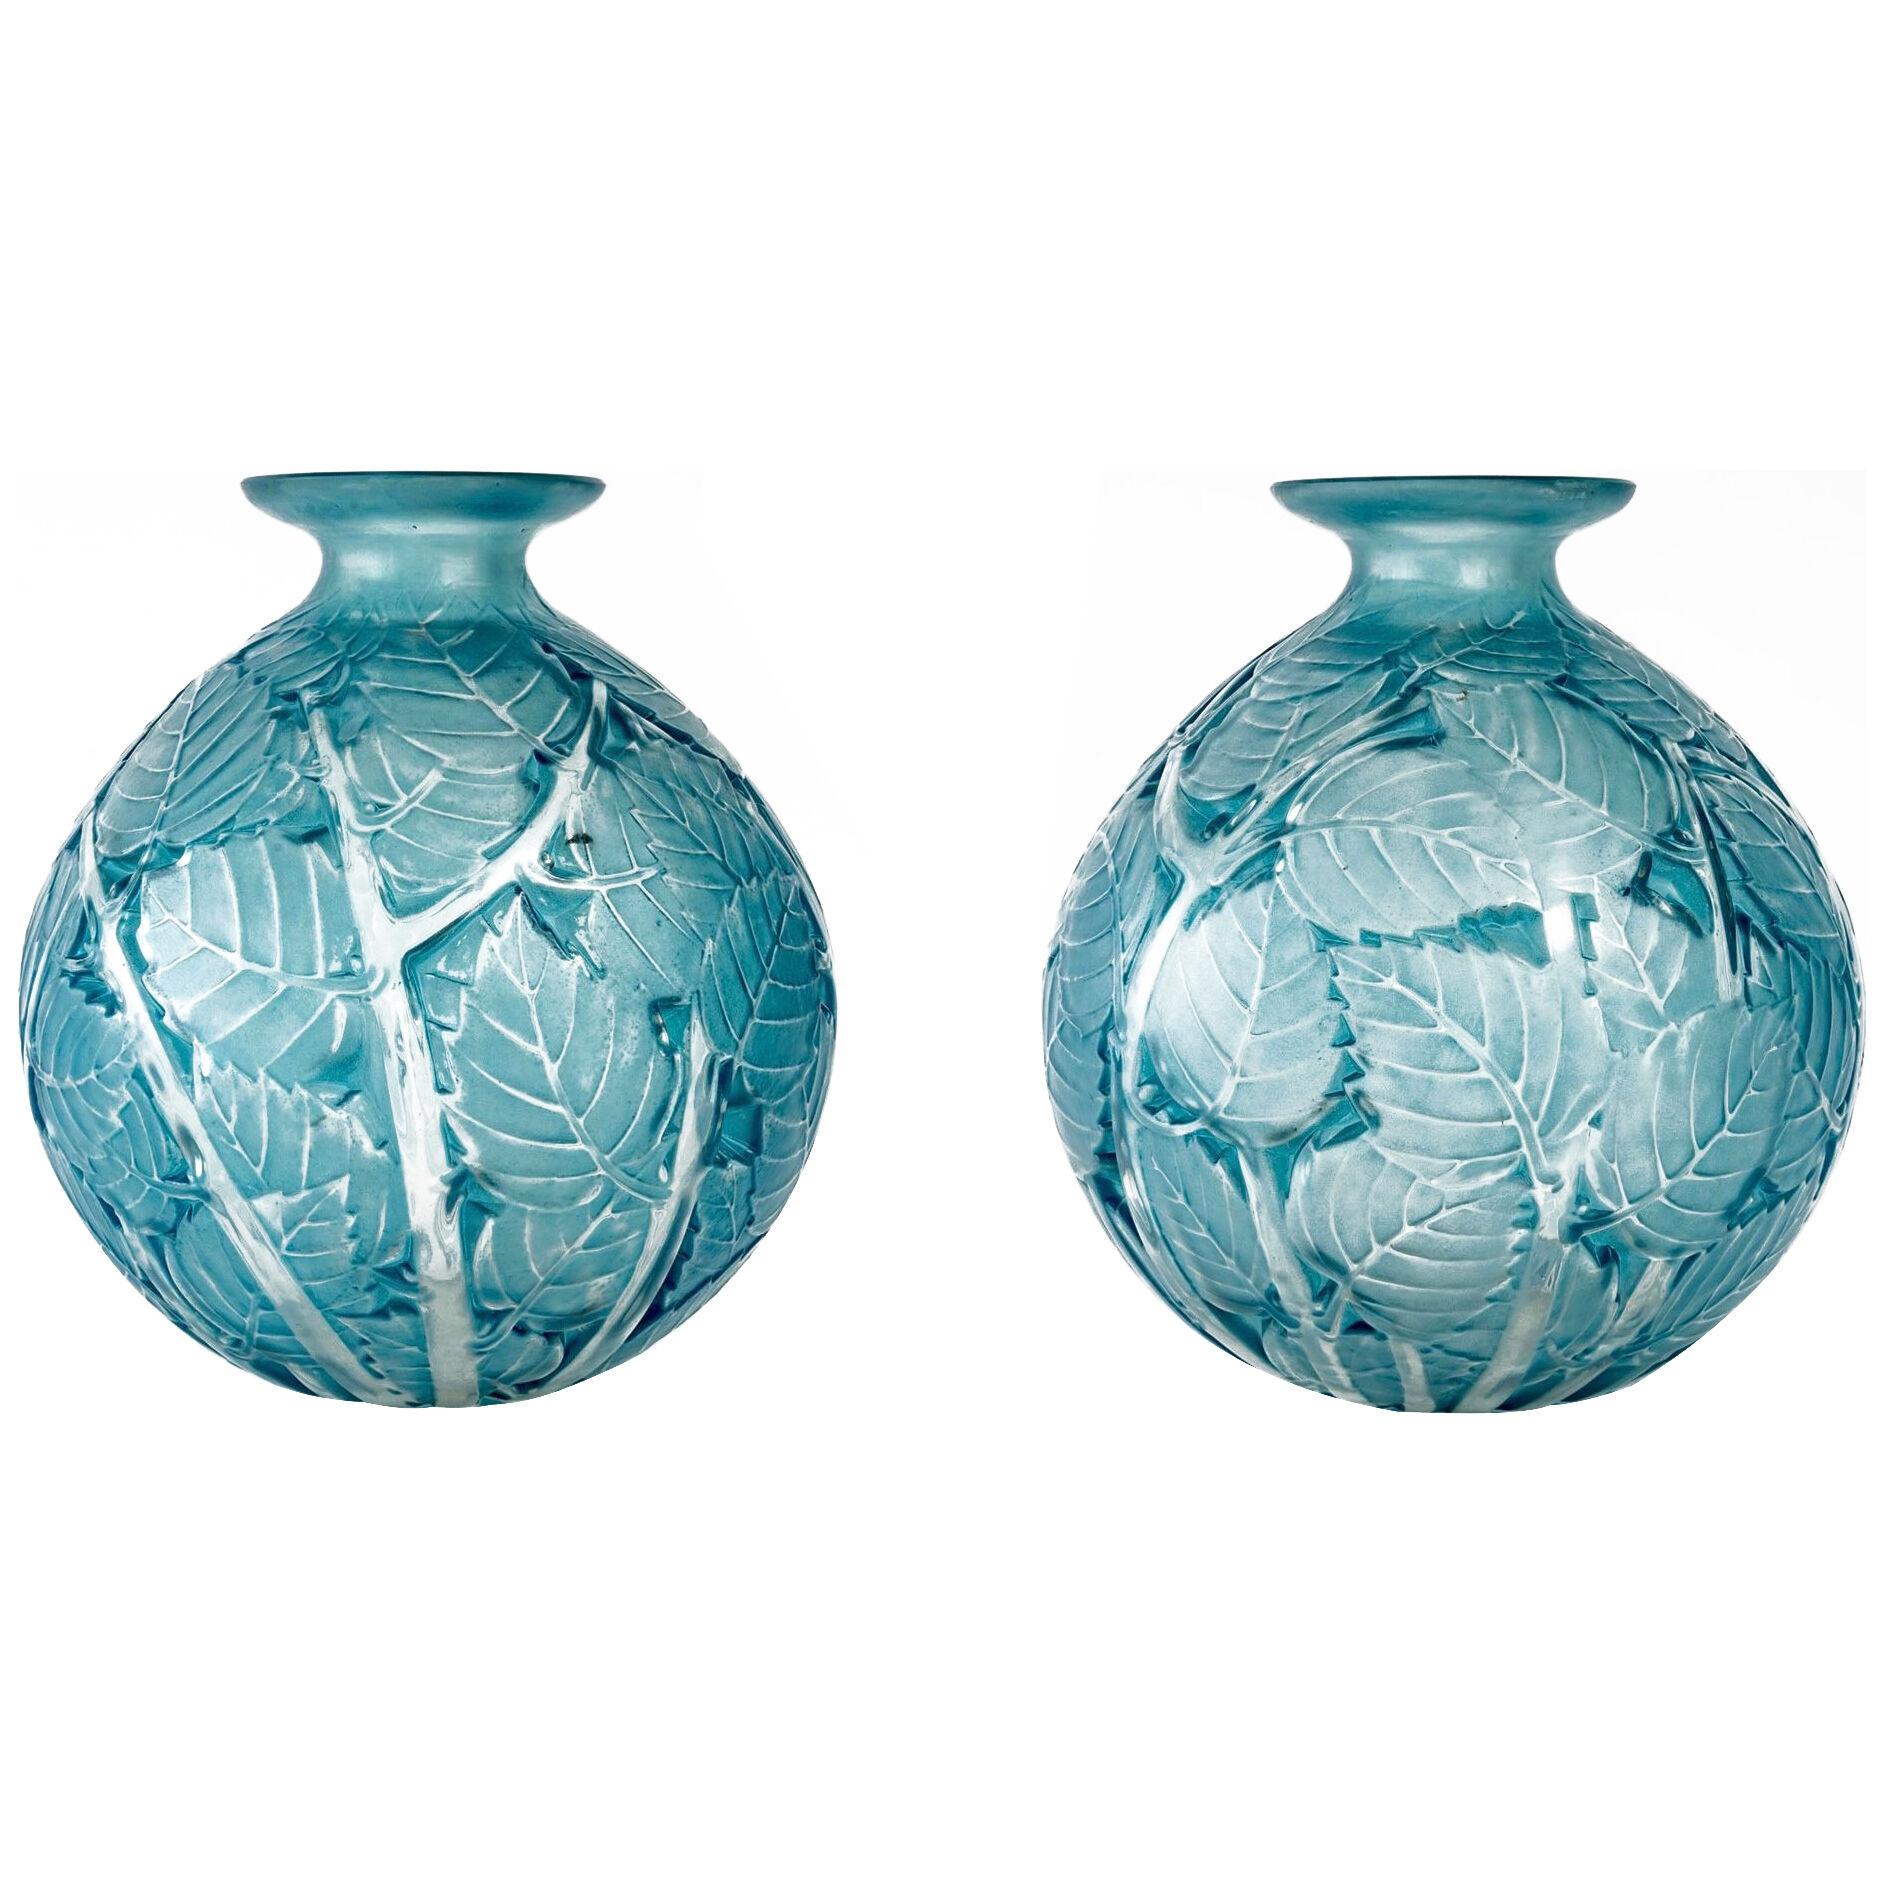 1929 René Lalique - Pair Of Vases Milan Frosted Glass With Blue Patina